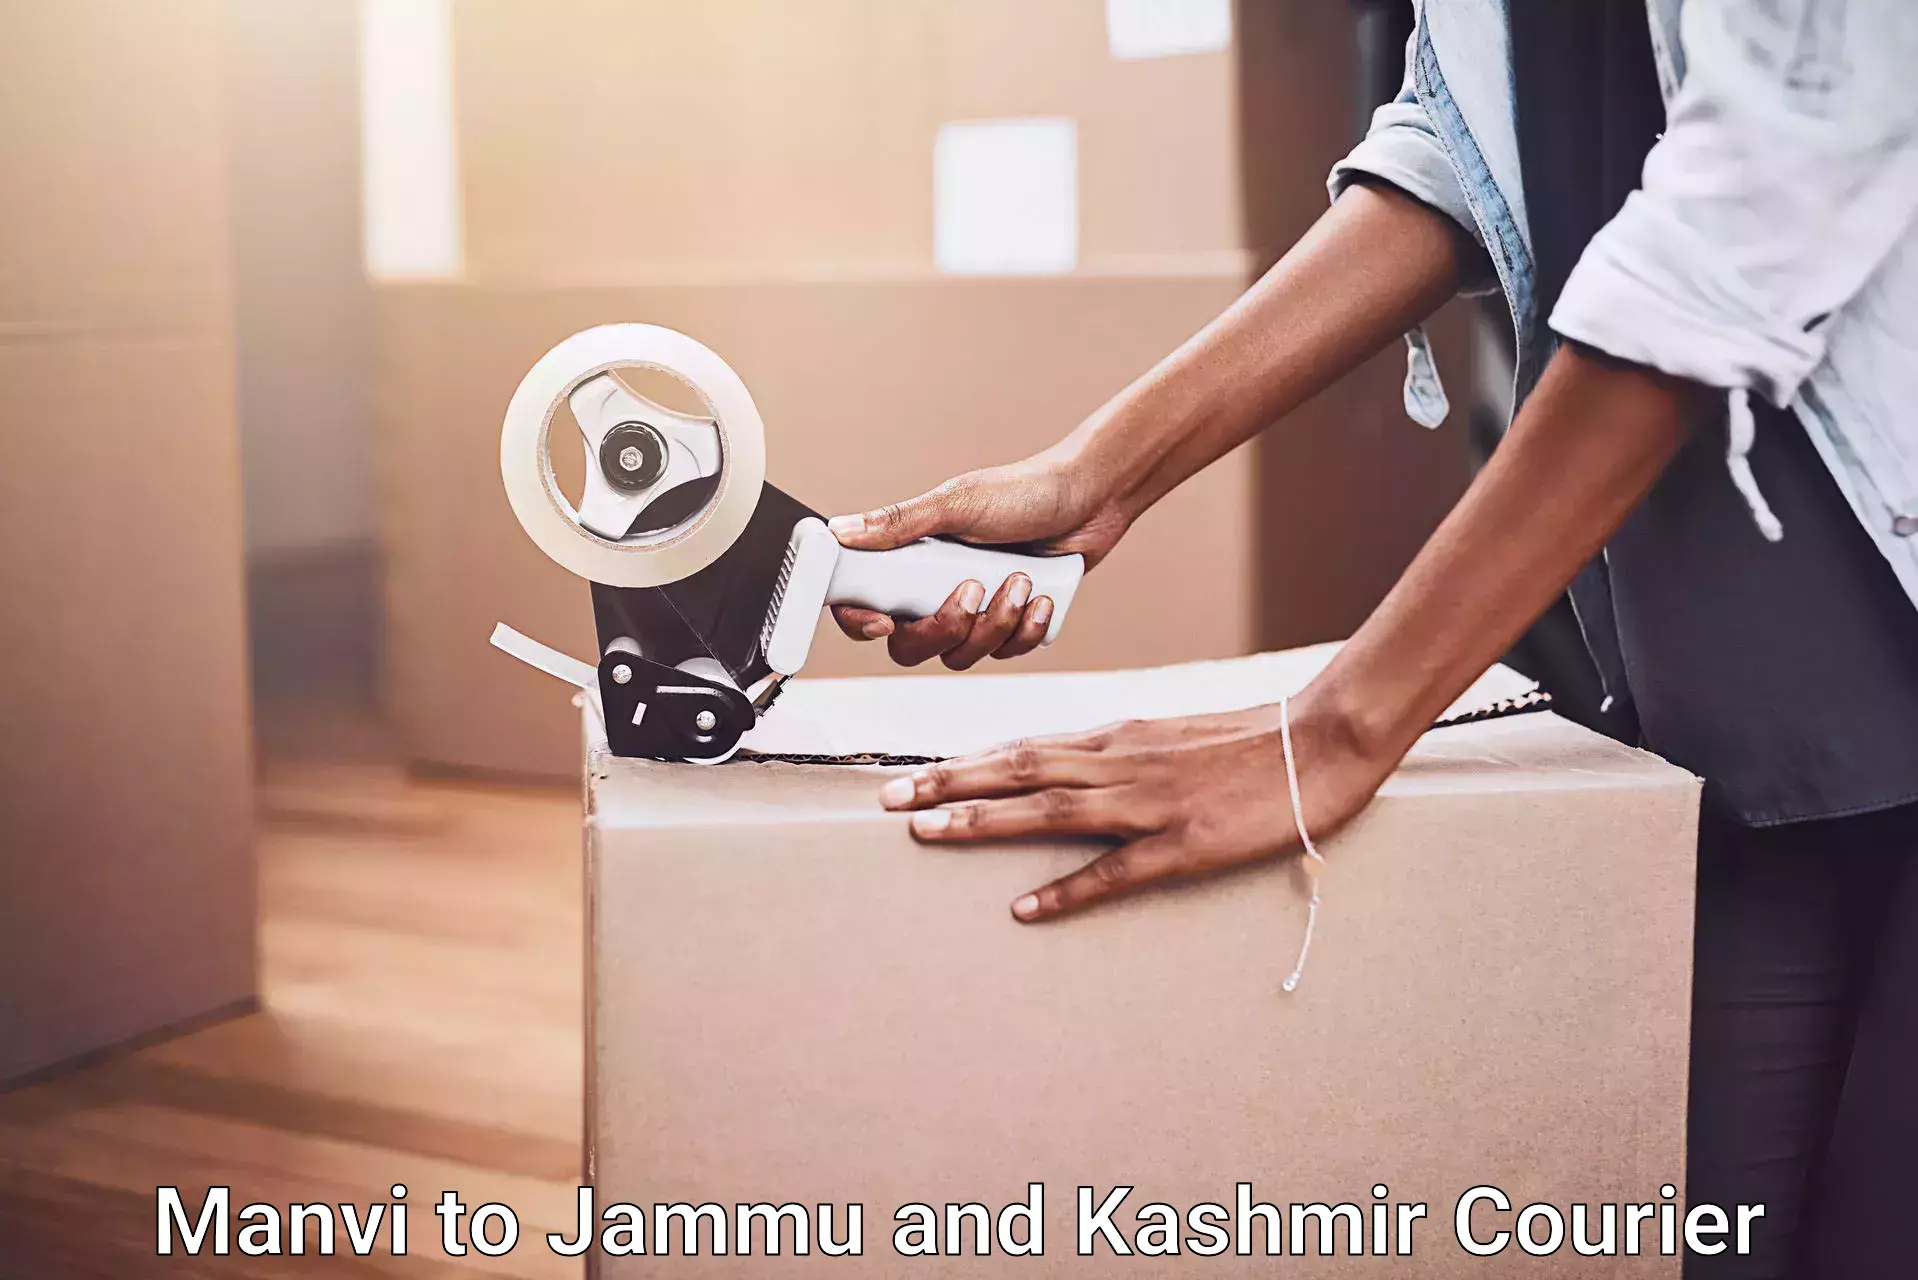 Moving and handling services Manvi to Jammu and Kashmir